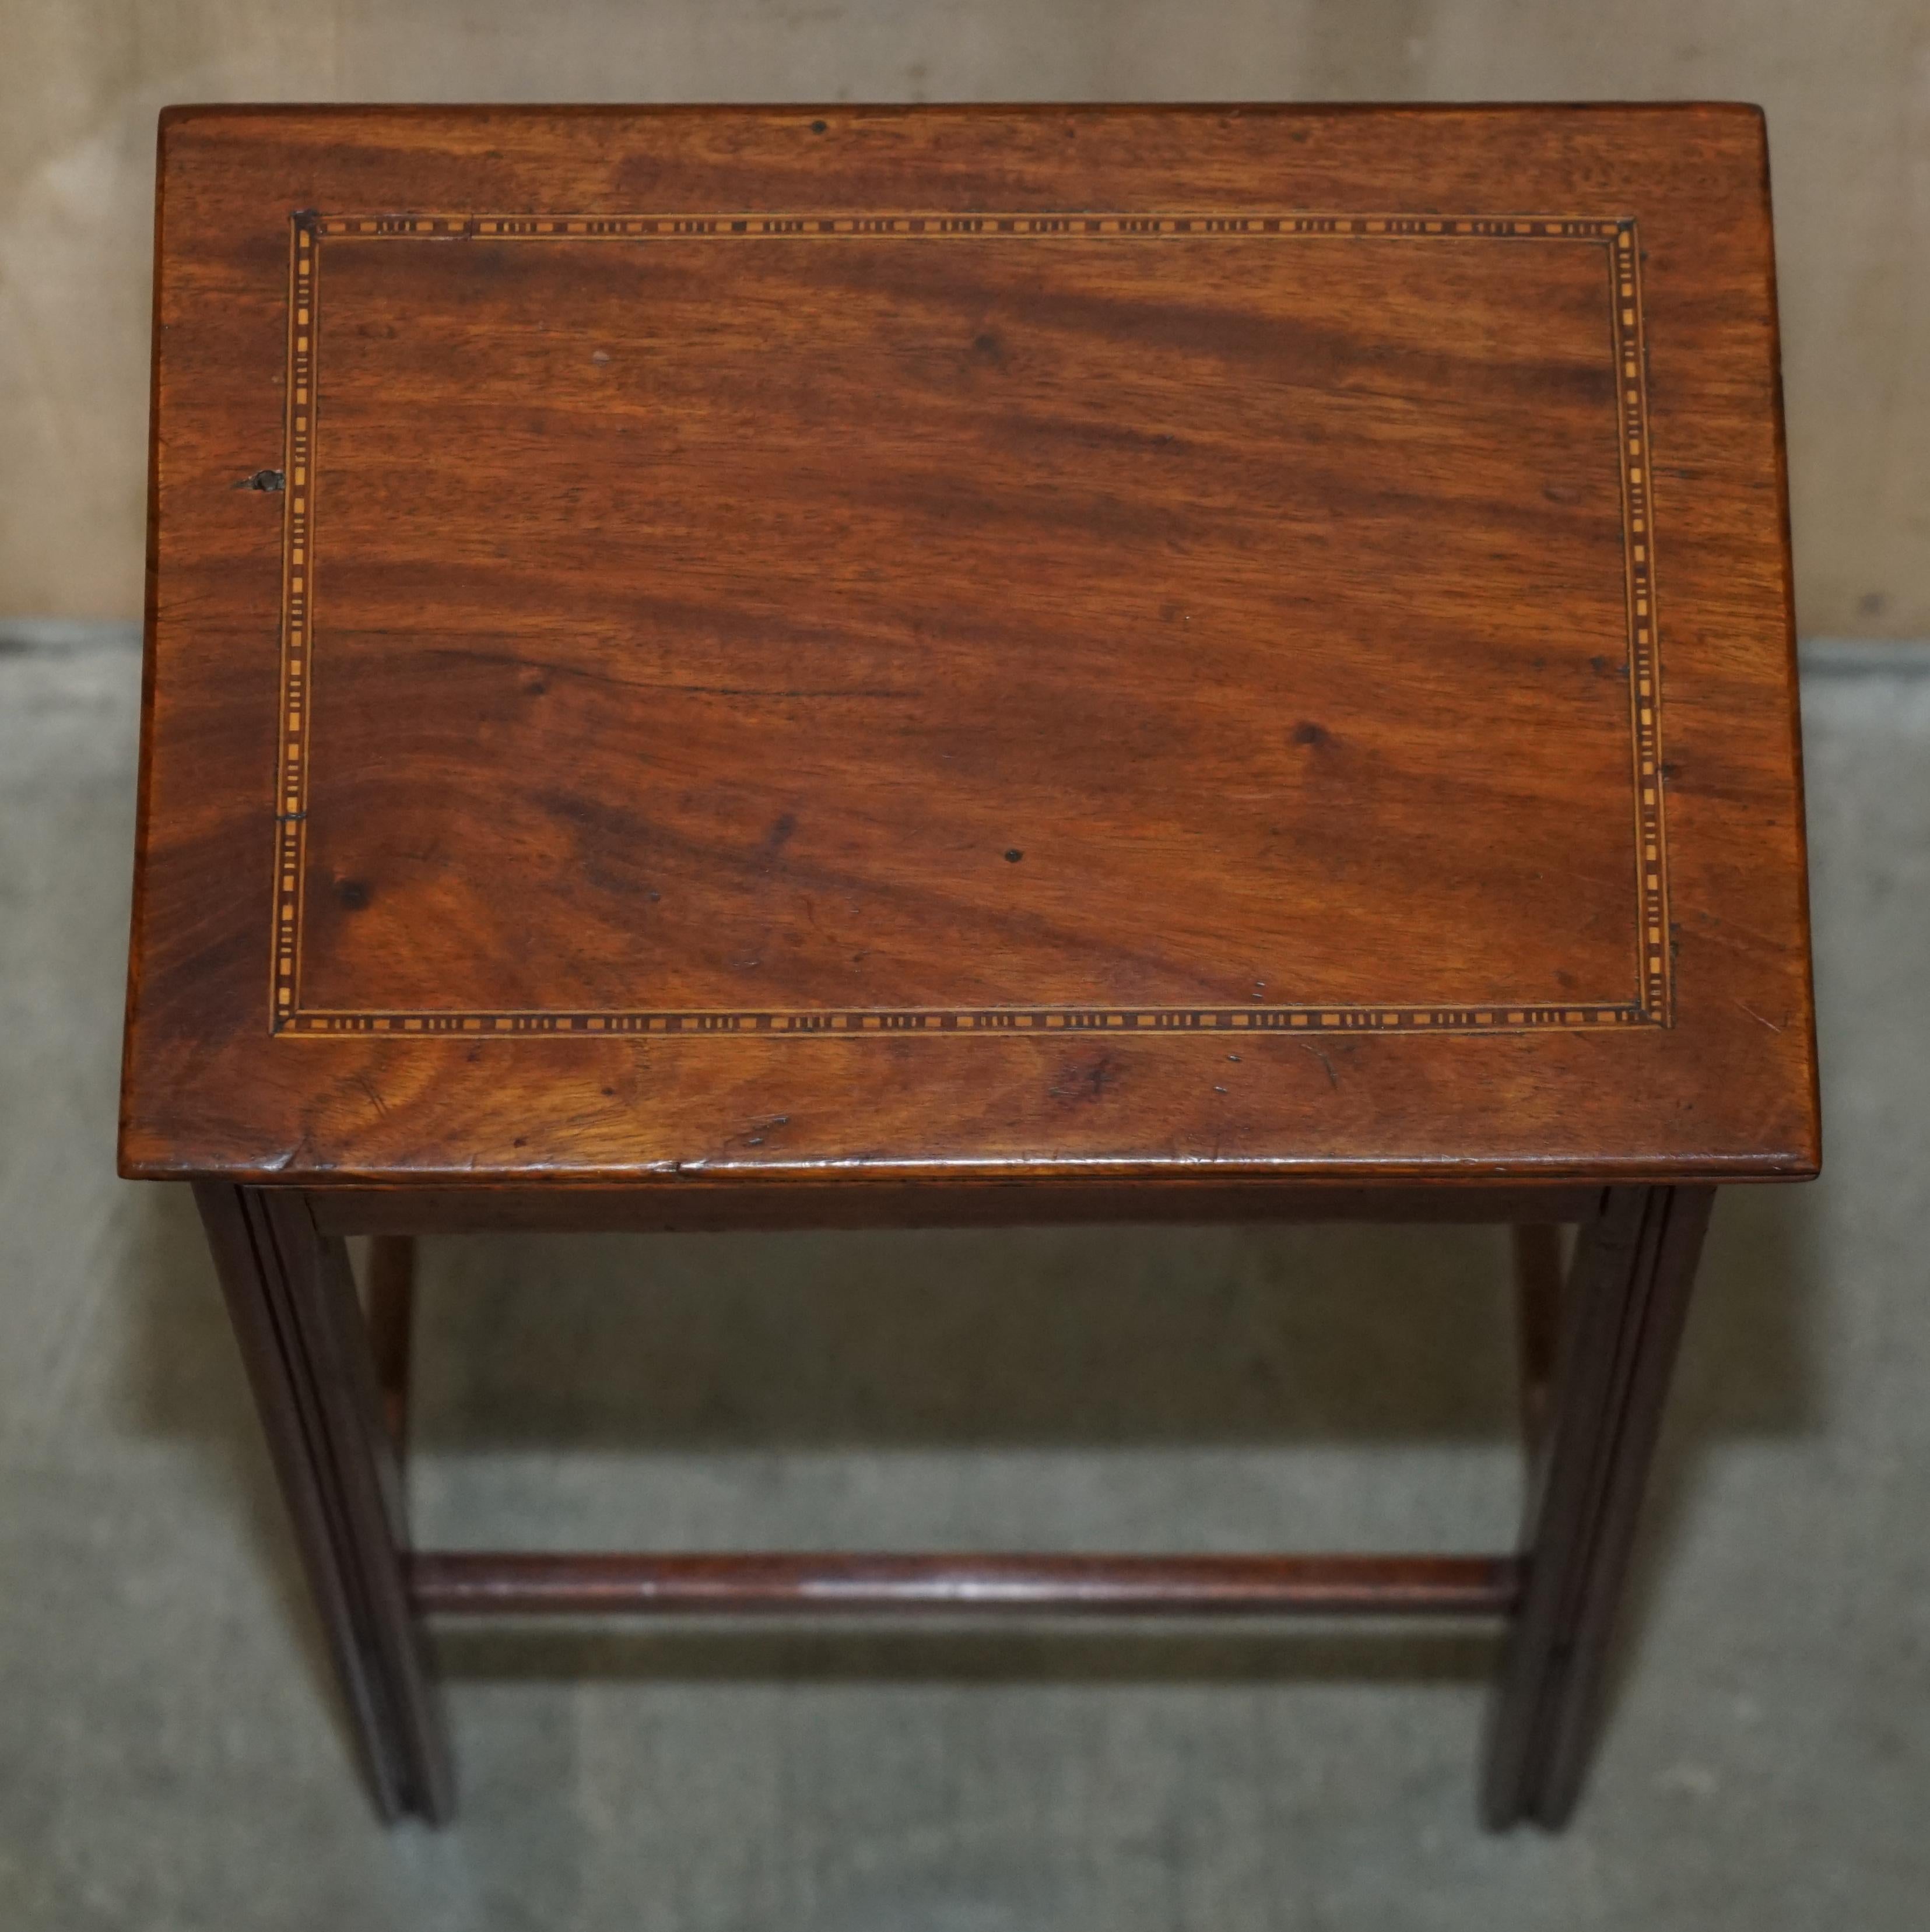 VINTAGE NEST OF TWO FLAmed HARDWOOD TABLES WiTH LOVELY BOXWOOD INLAID BOARDER'S en vente 9